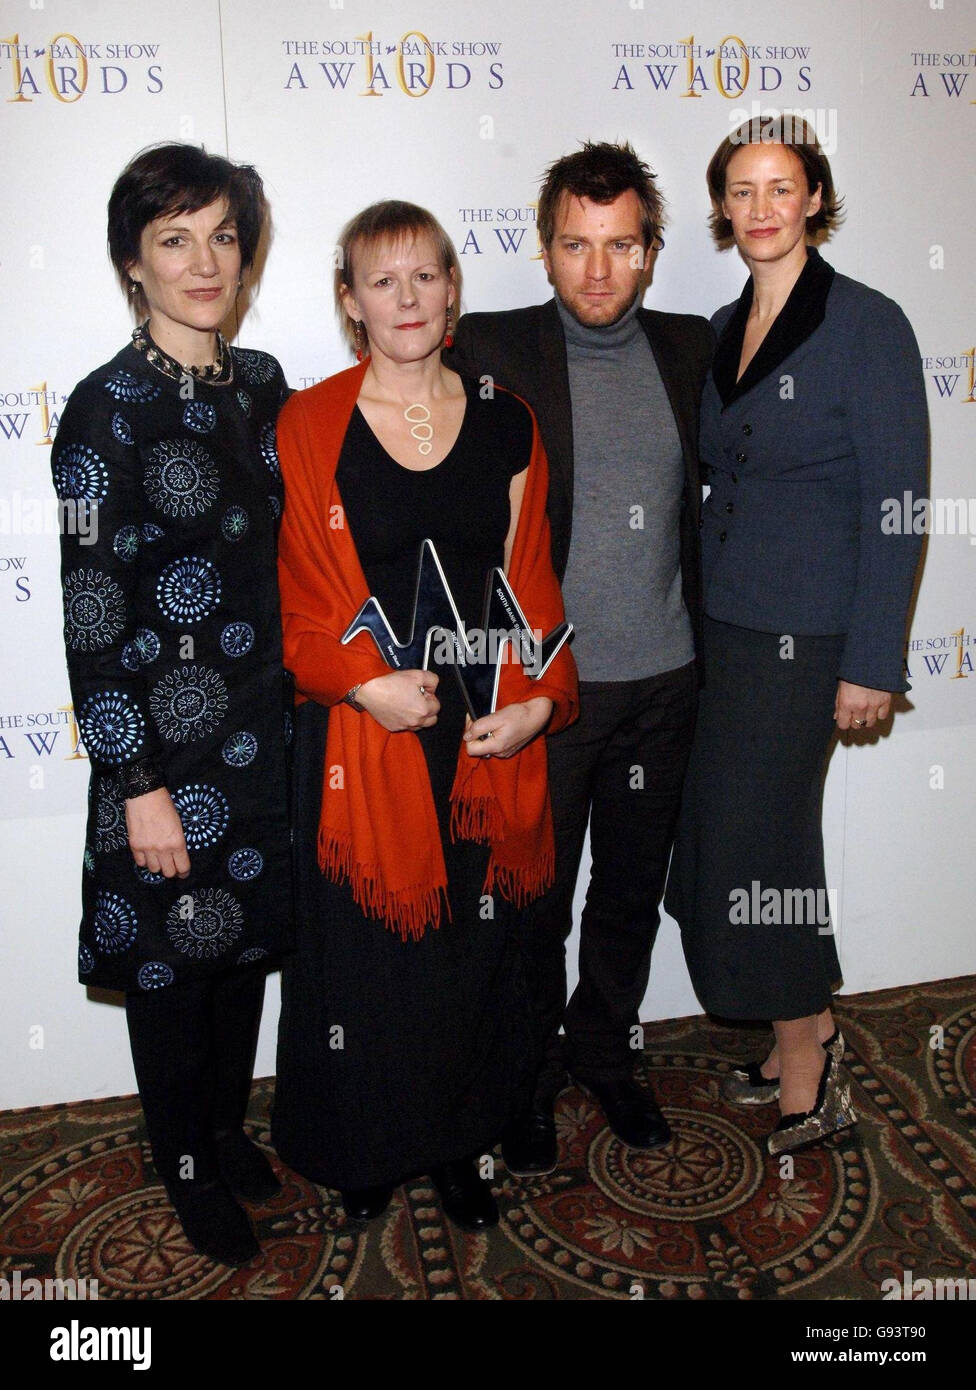 Winners of the Theatre Award (for 'Mary Stuart', L-R) Harriet Walter, Phyllida Lloyd and Janet McTeer with guest presenter Ewan McGregor at the 10th annual South Bank Show Awards, rewarding excellence in everything from opera to pop music and literature to visual art, at the Savoy, central London, Friday 27 January 2006. PRESS ASSOCIATION Photo. Photo credit should read: Steve Parsons/PA Stock Photo